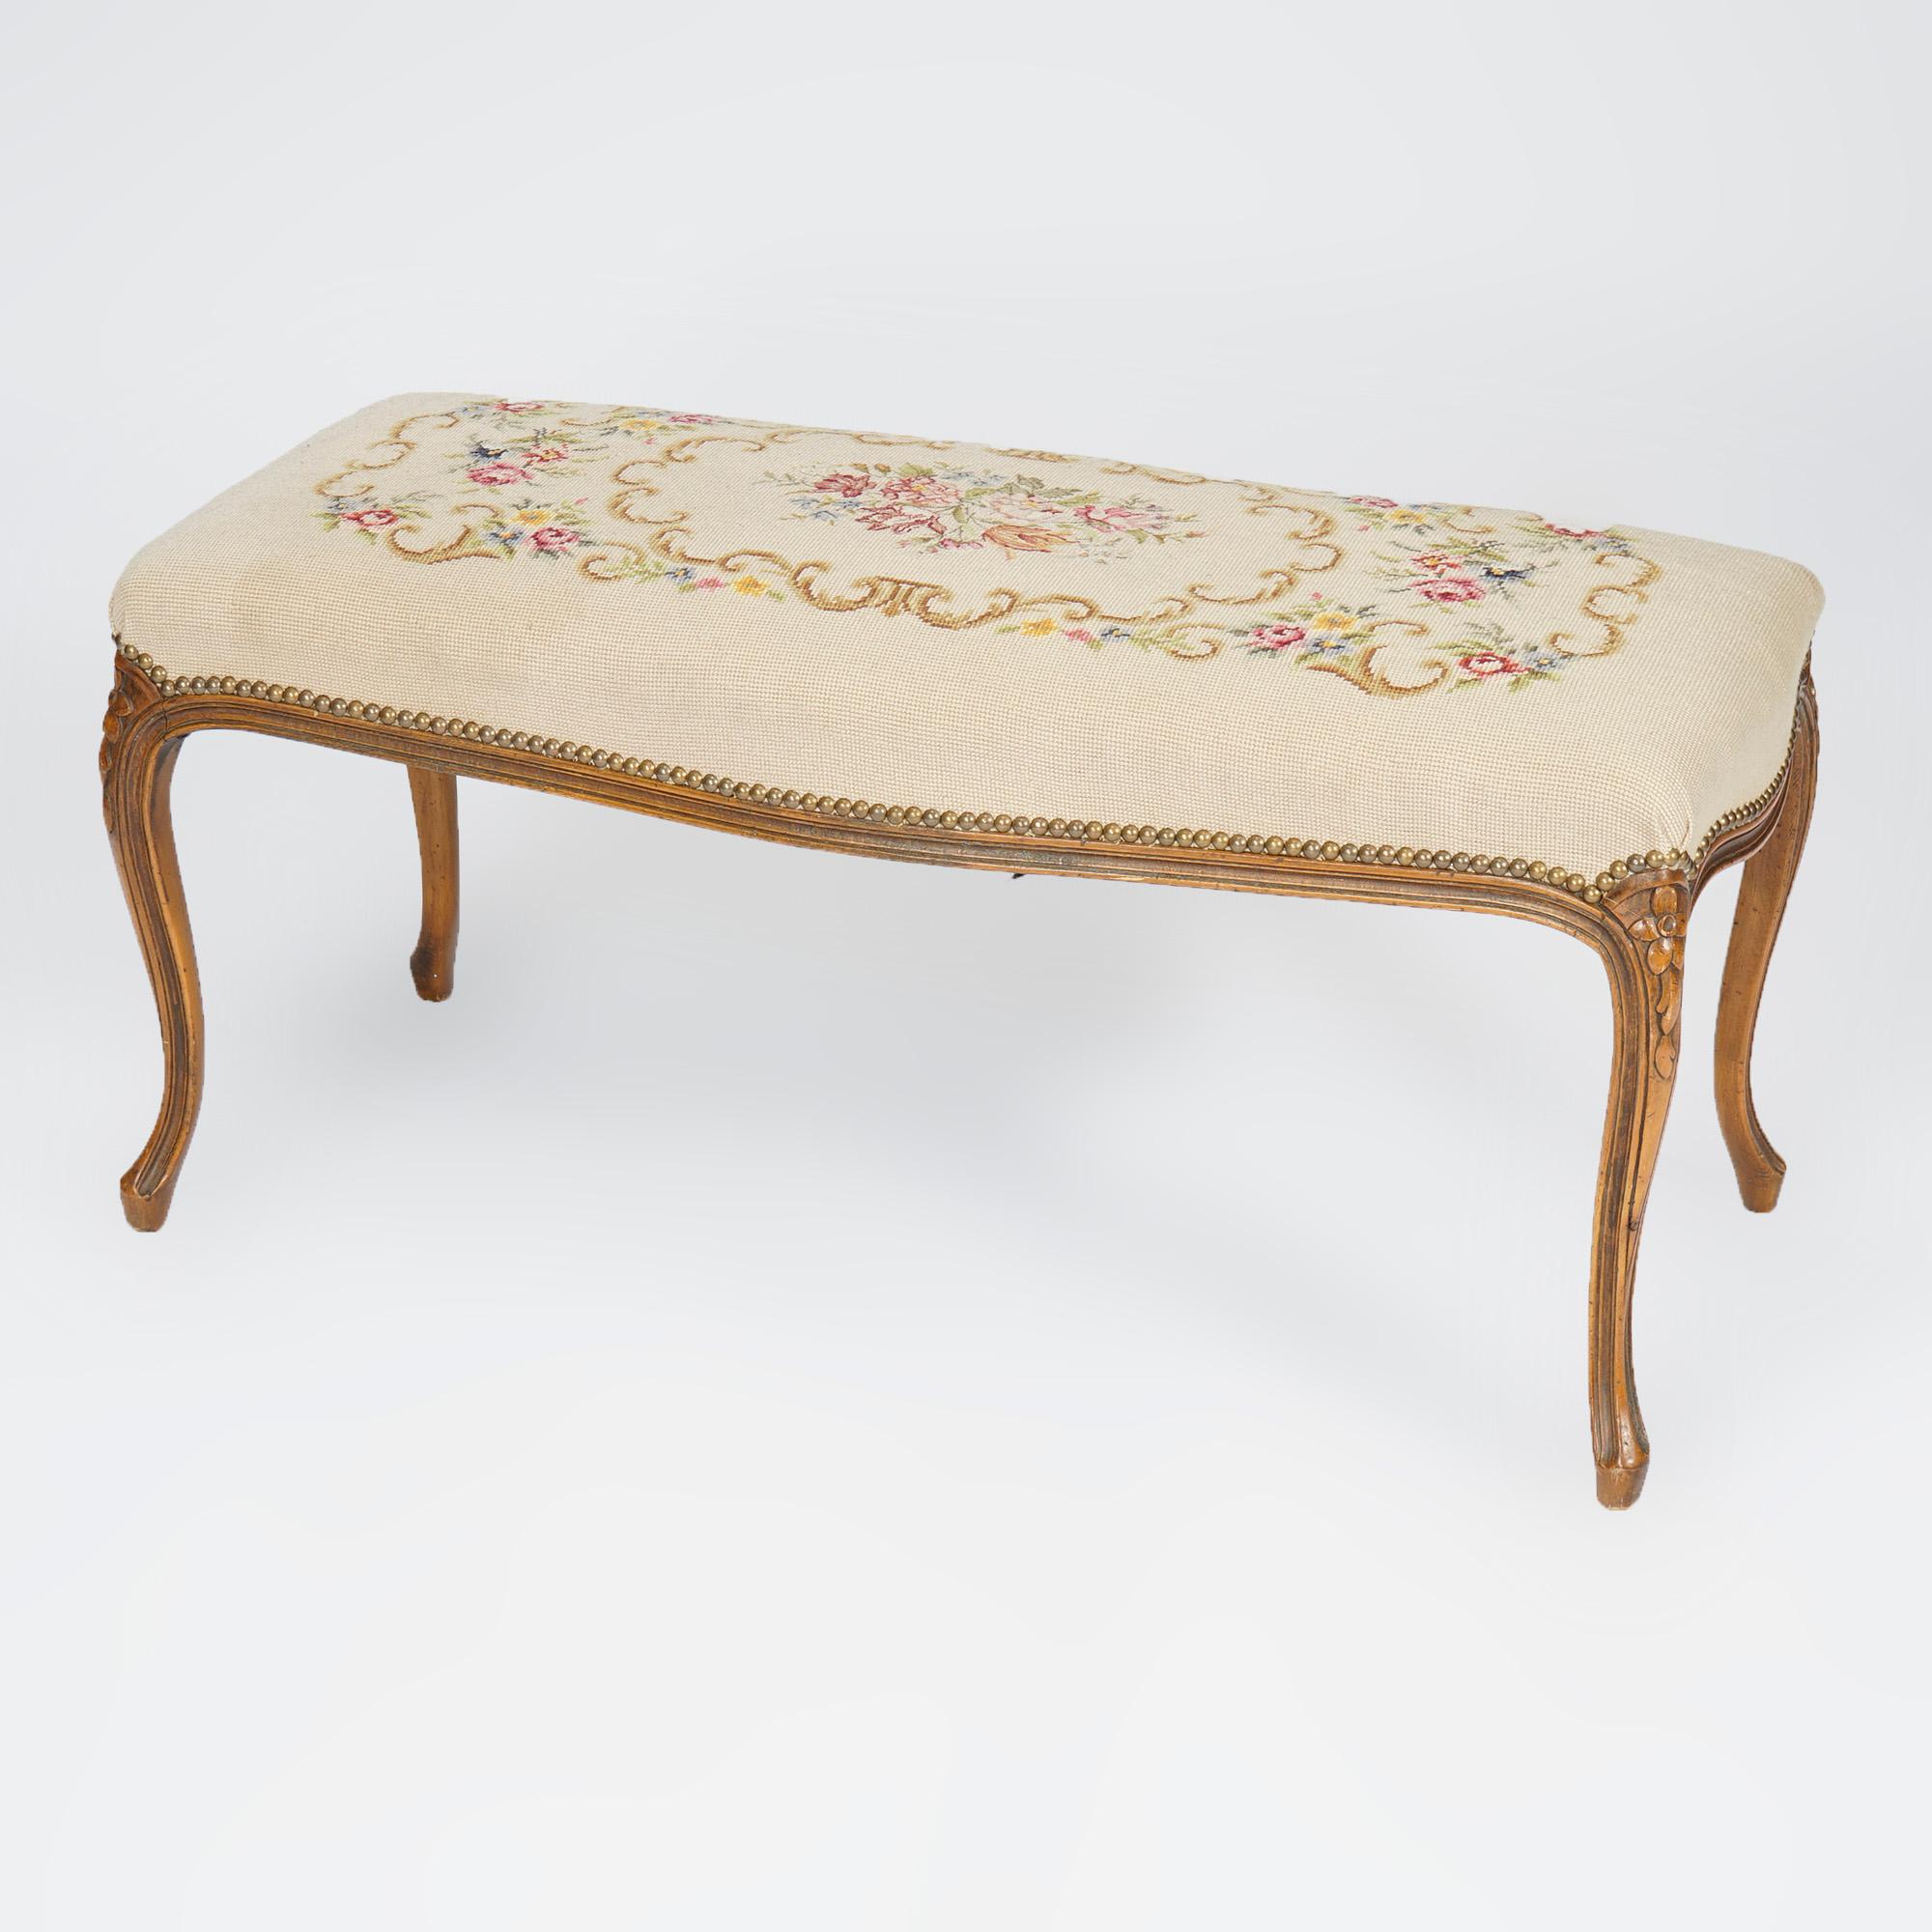 An antique French Louis XV style long bench offers floral needlepoint upholstered seat over fruitwood frame raised on cabriole legs with carved floral knees, c1930

Measures- 18'' H x 37.5'' W x 16.25'' D.

Catalogue Note: Ask about DISCOUNTED